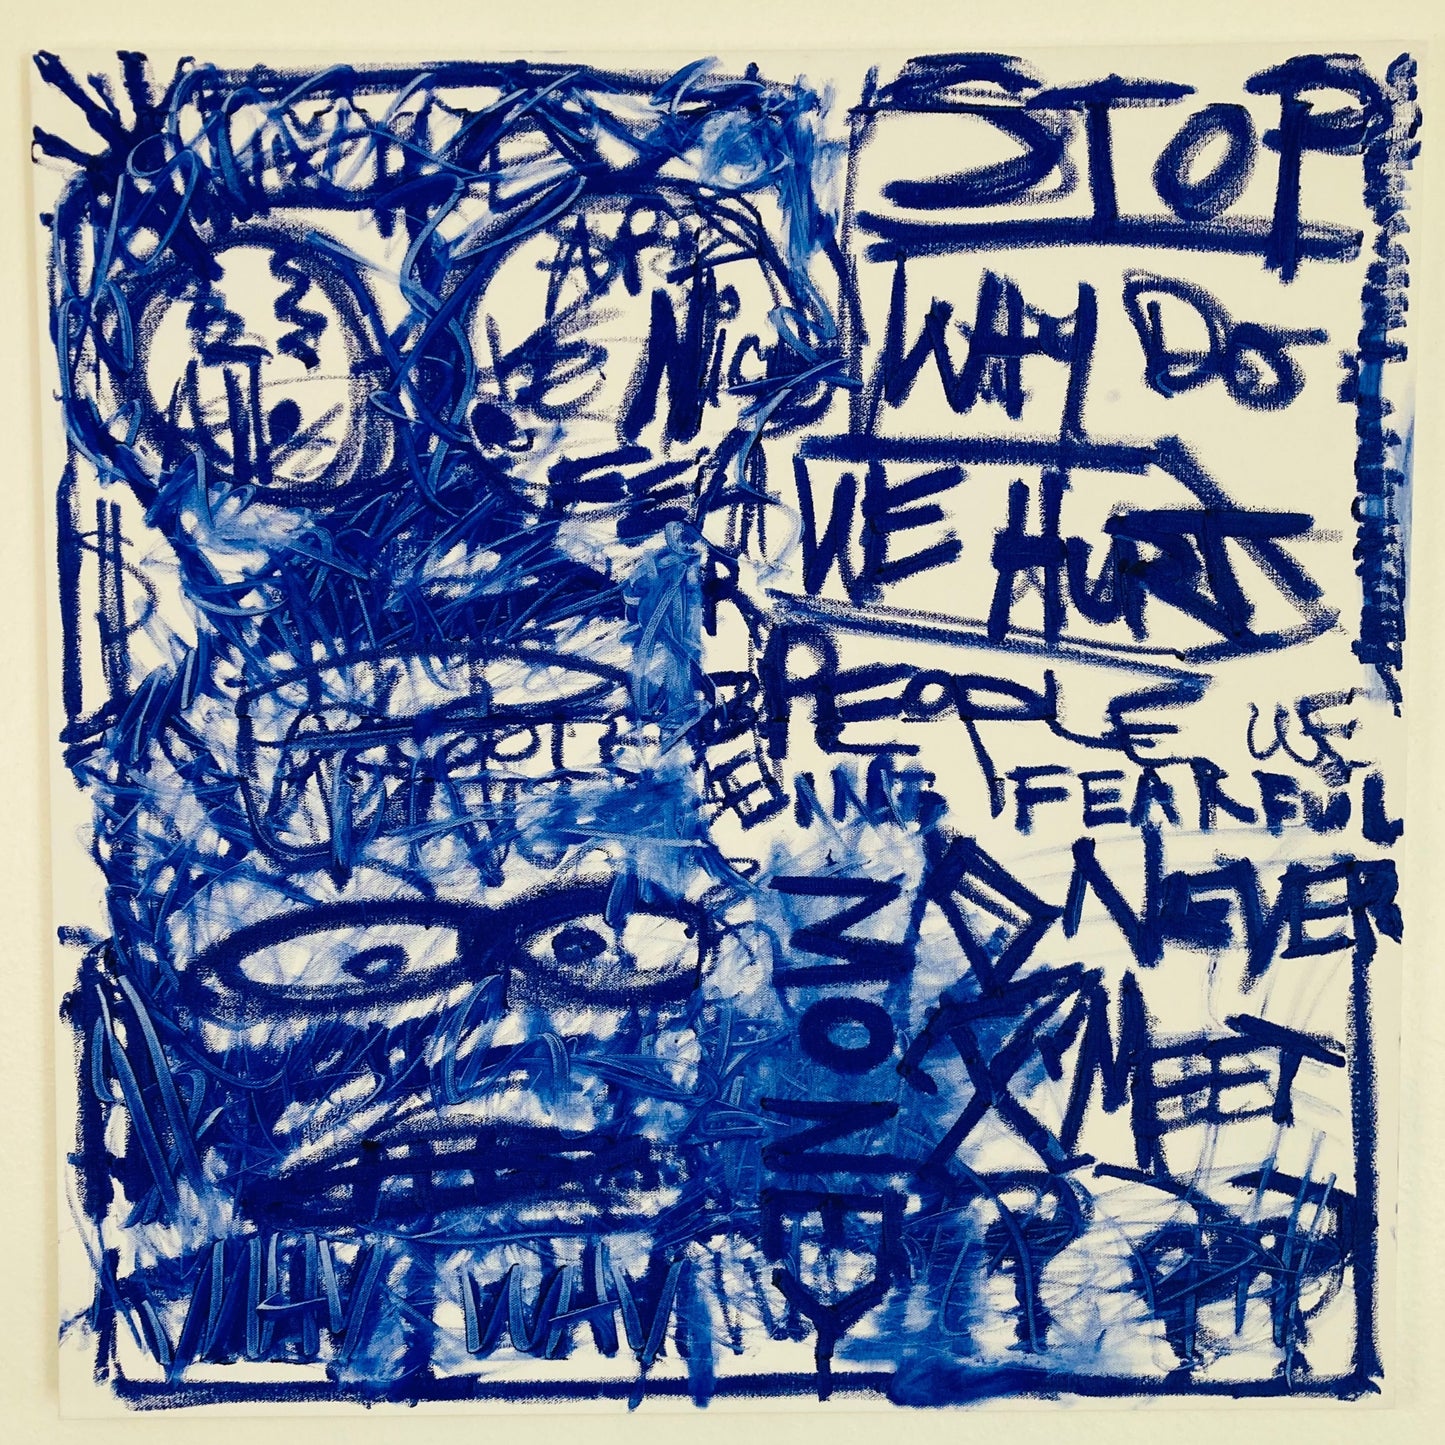 Stop Fear Hurt - Original Painting - Please Email to Purchase